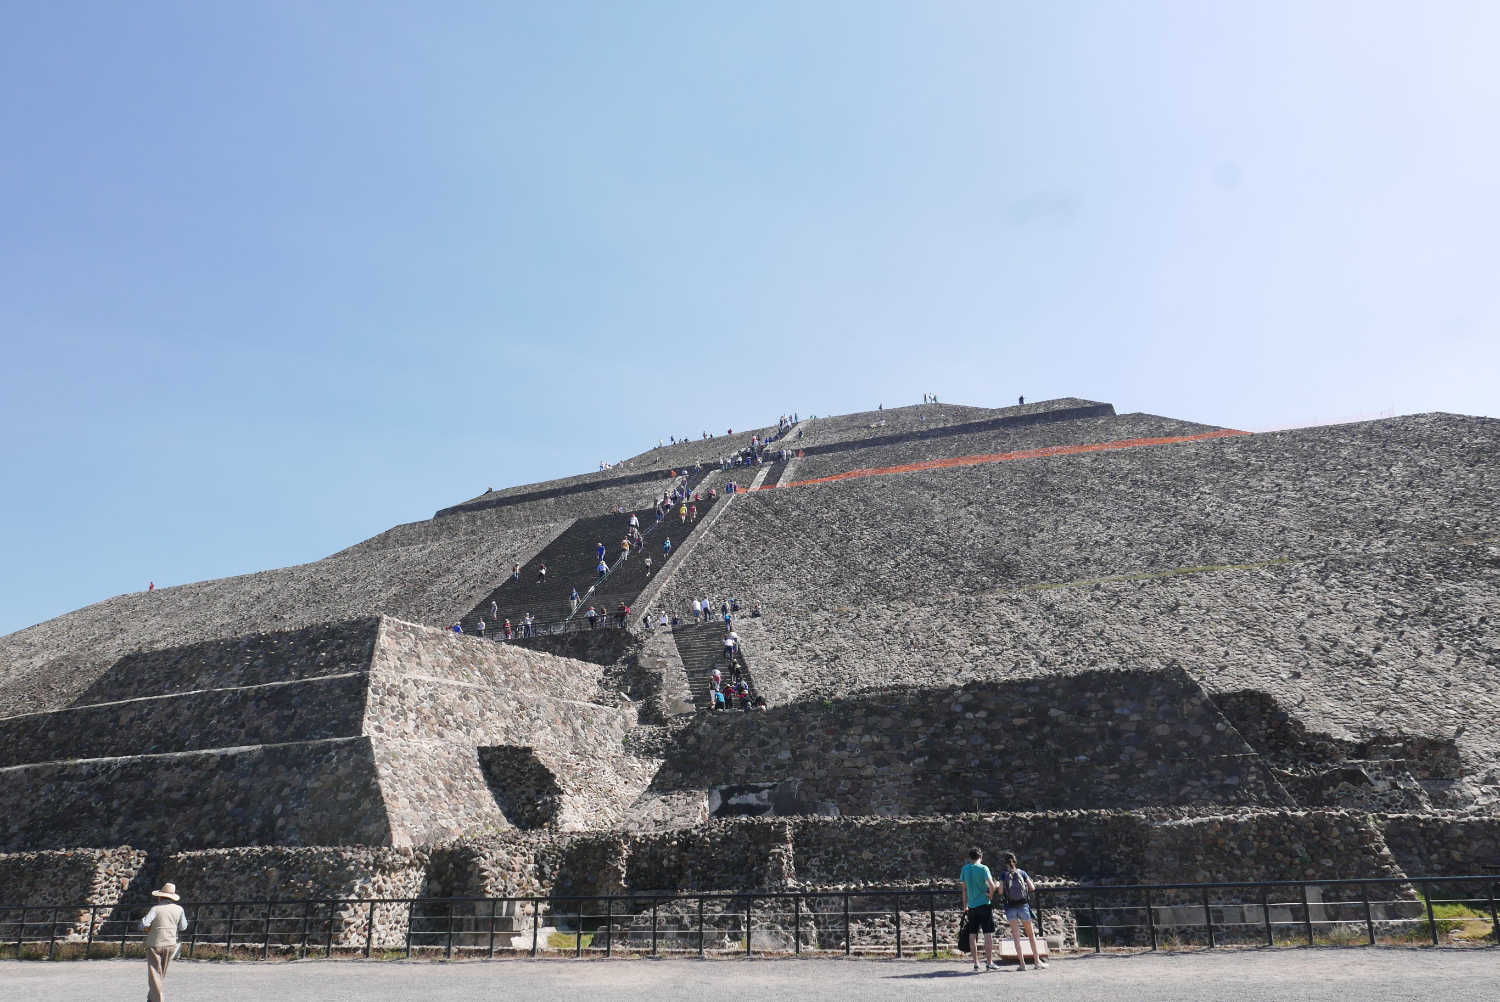 Closer look of Pyramid of the Sun in Teotihuacan